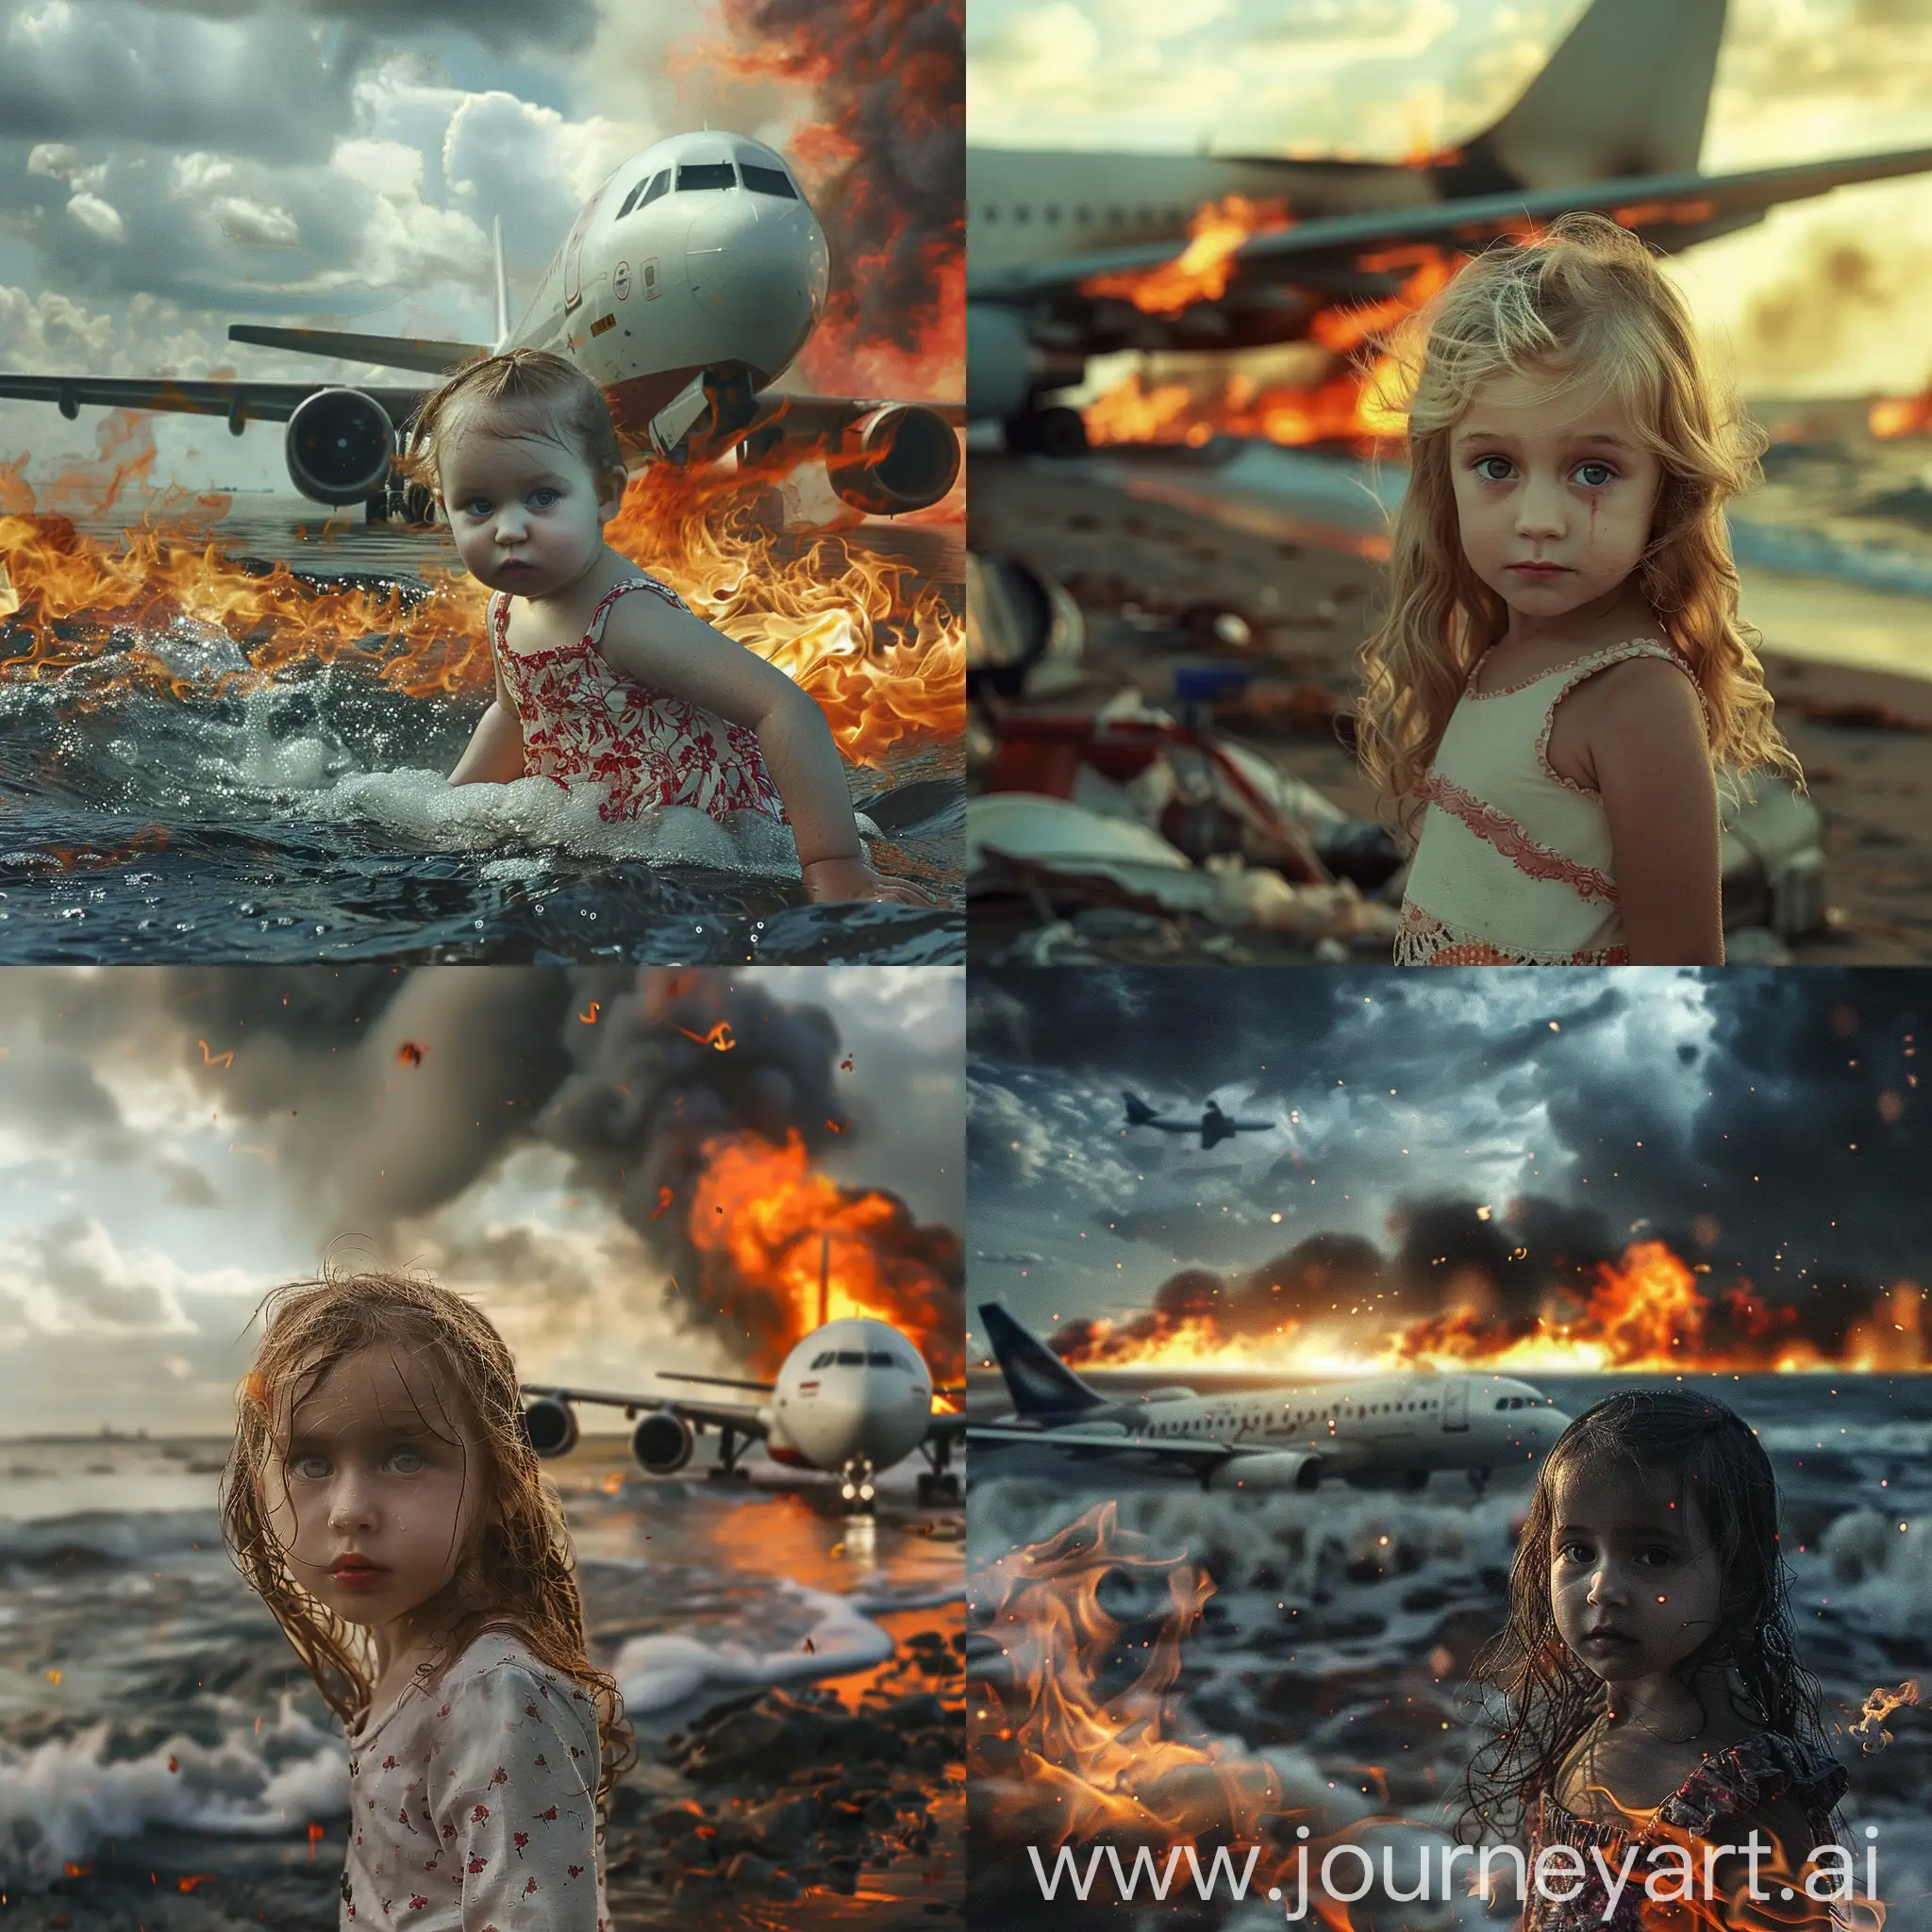 Adorable-Little-Girl-Flying-Airplane-over-the-Sea-with-Fiery-Sky